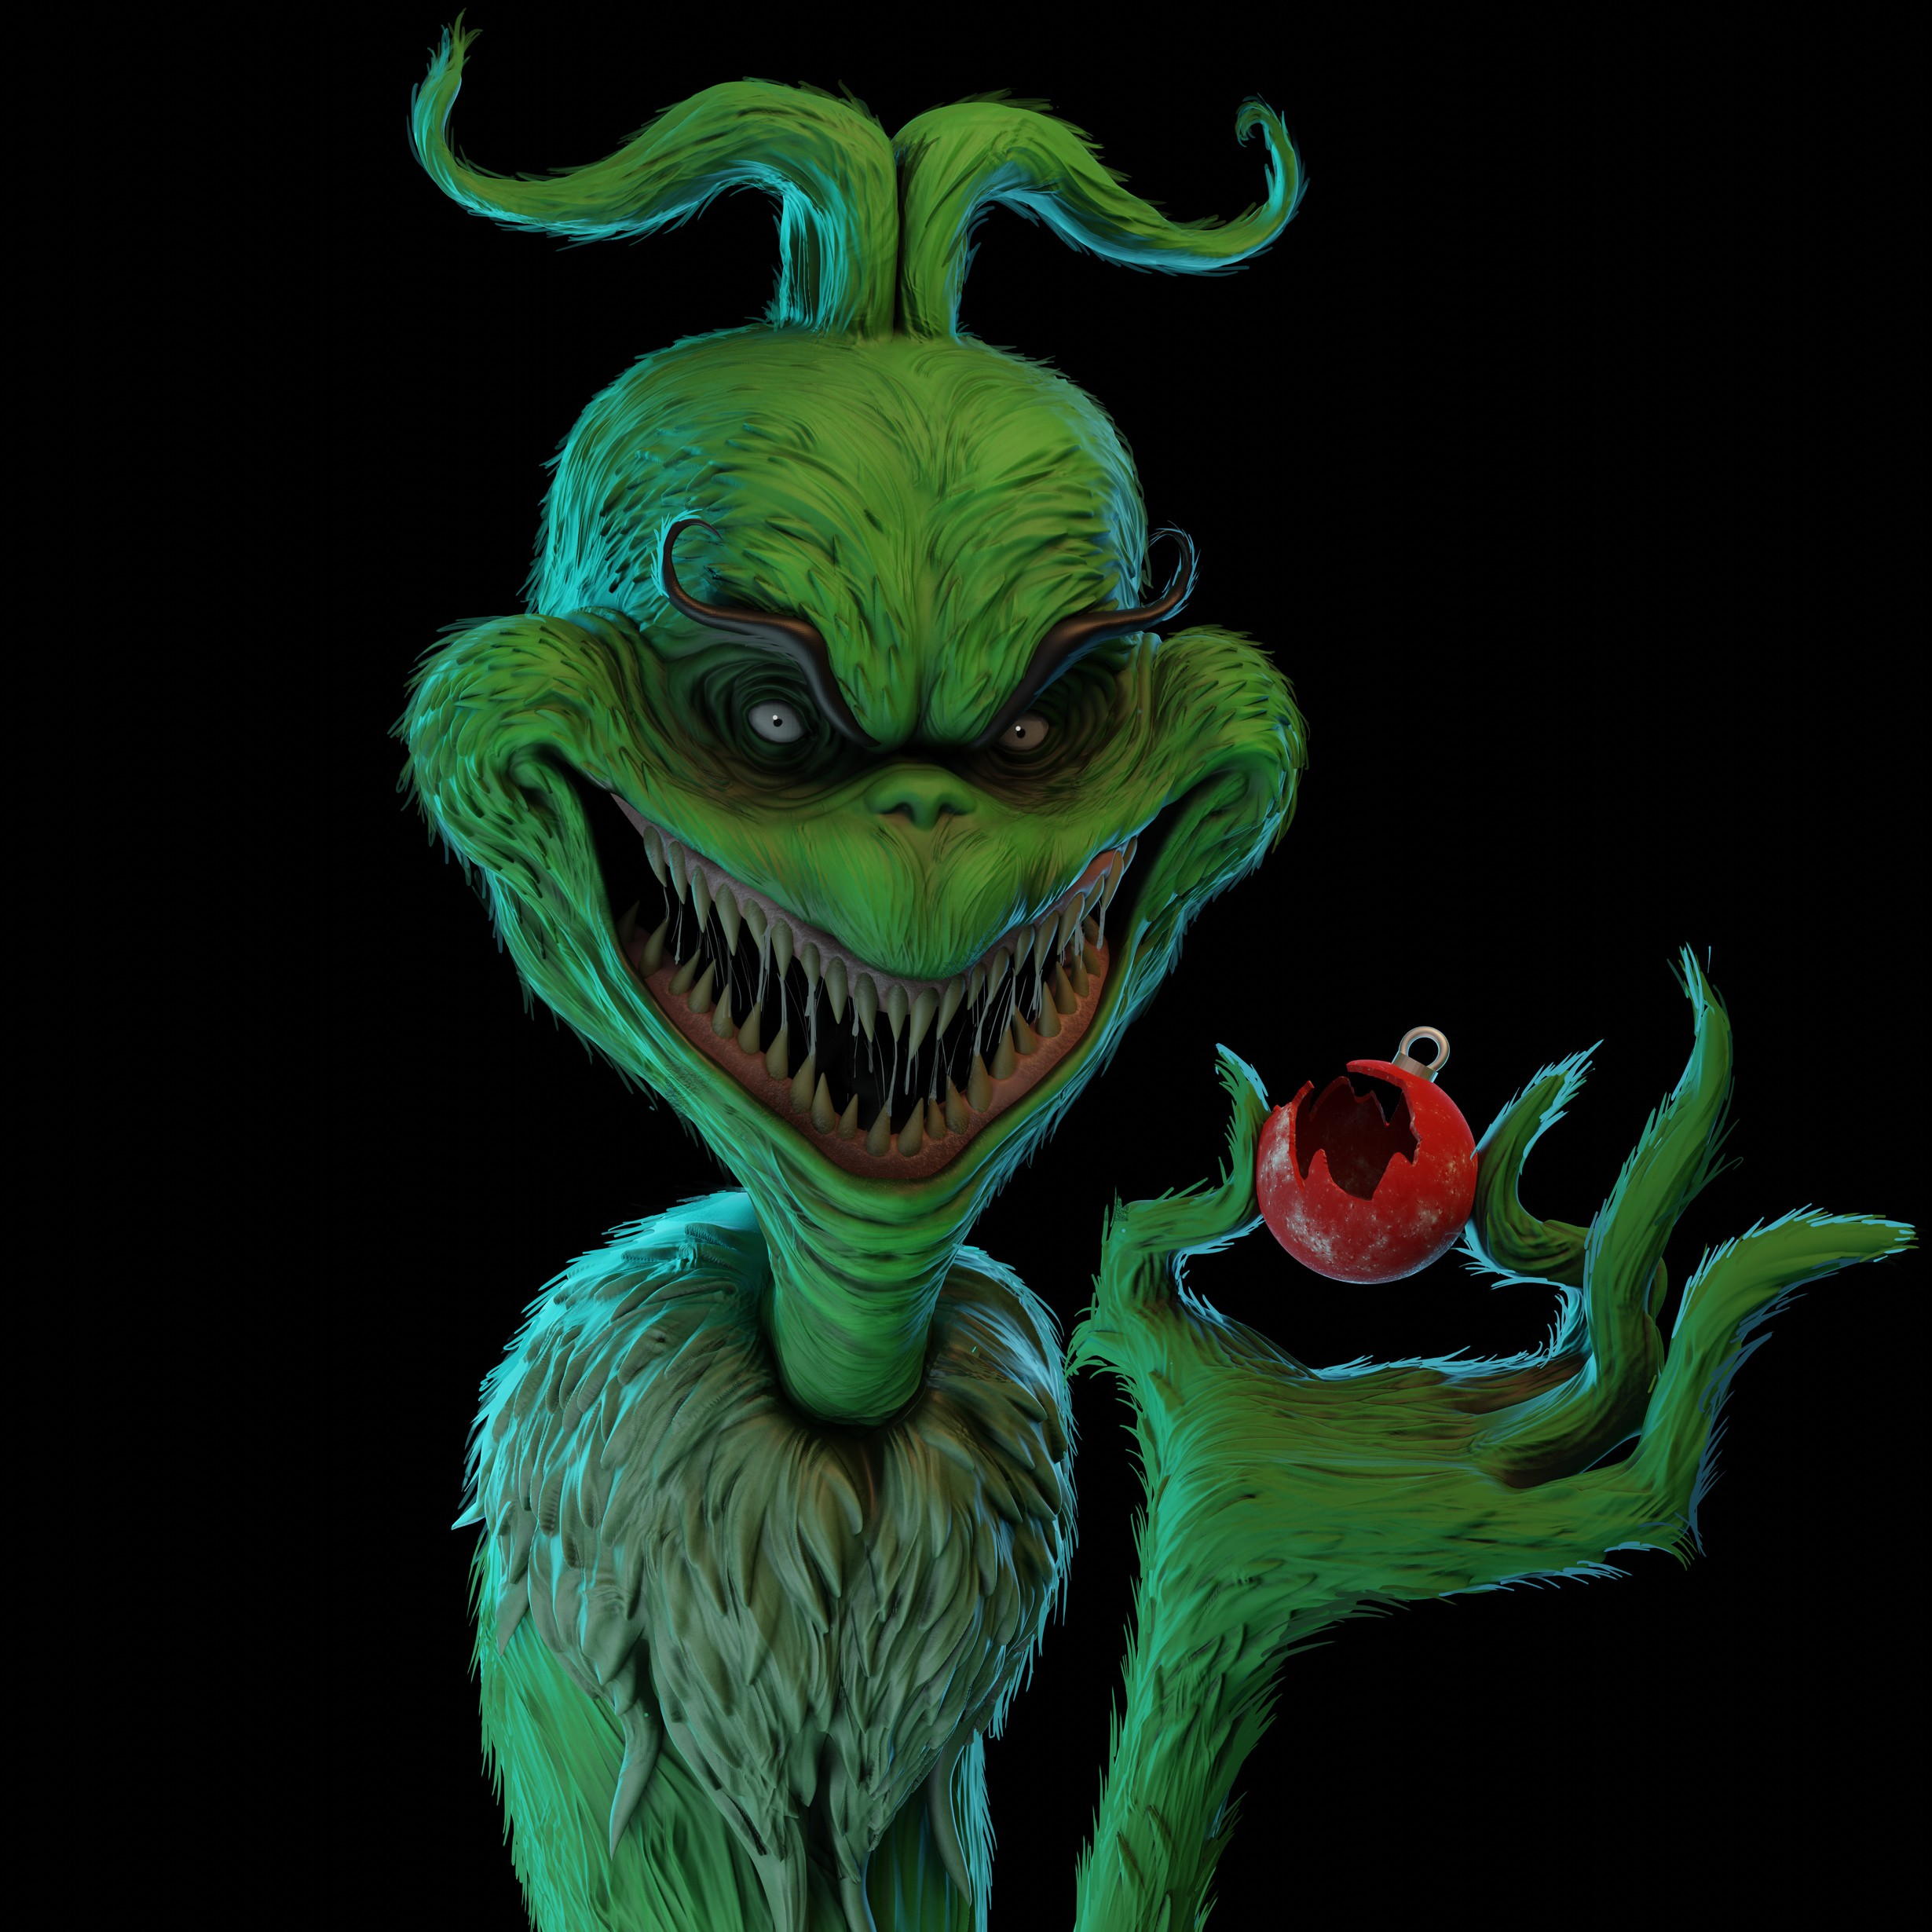 Grinch Wallpapers